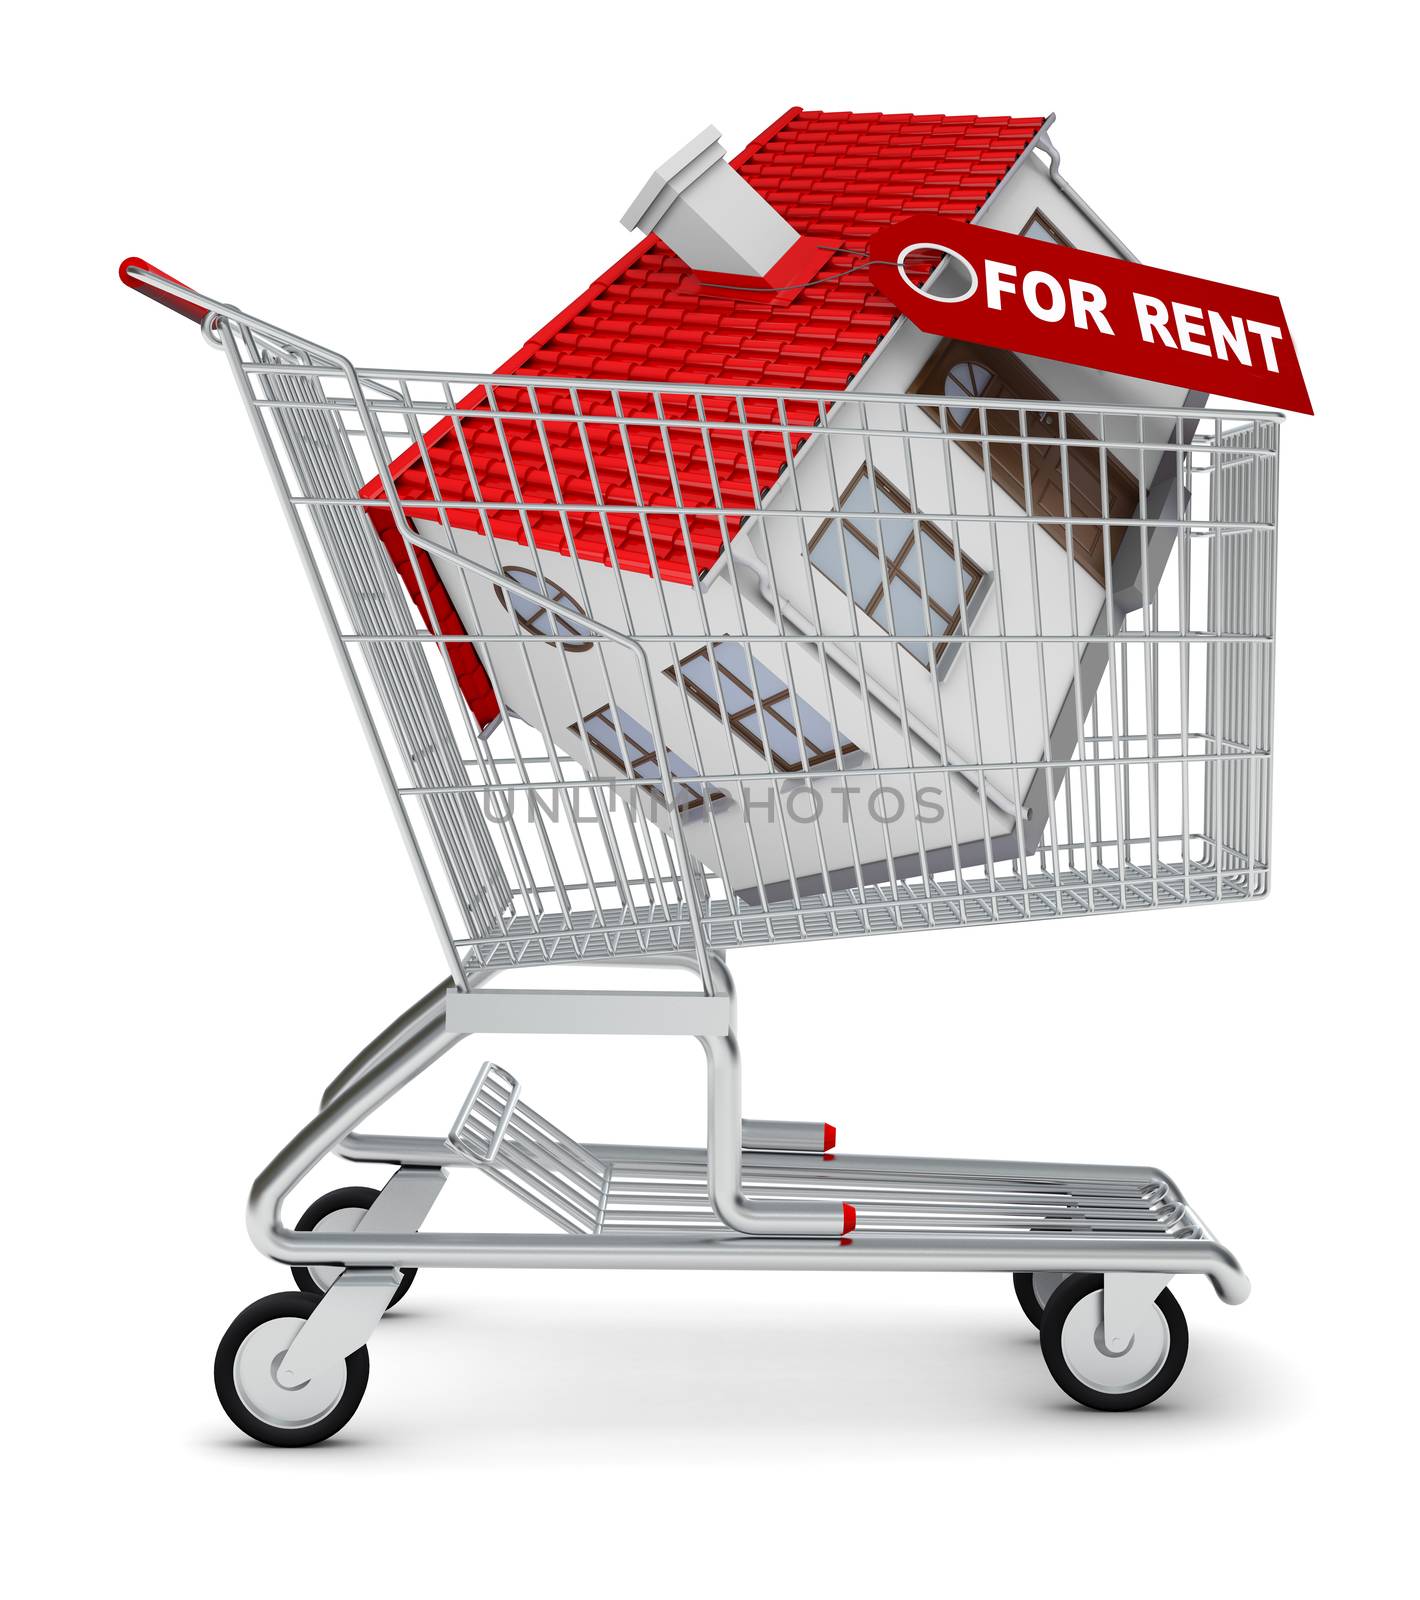 House for rent in shopping cart by cherezoff